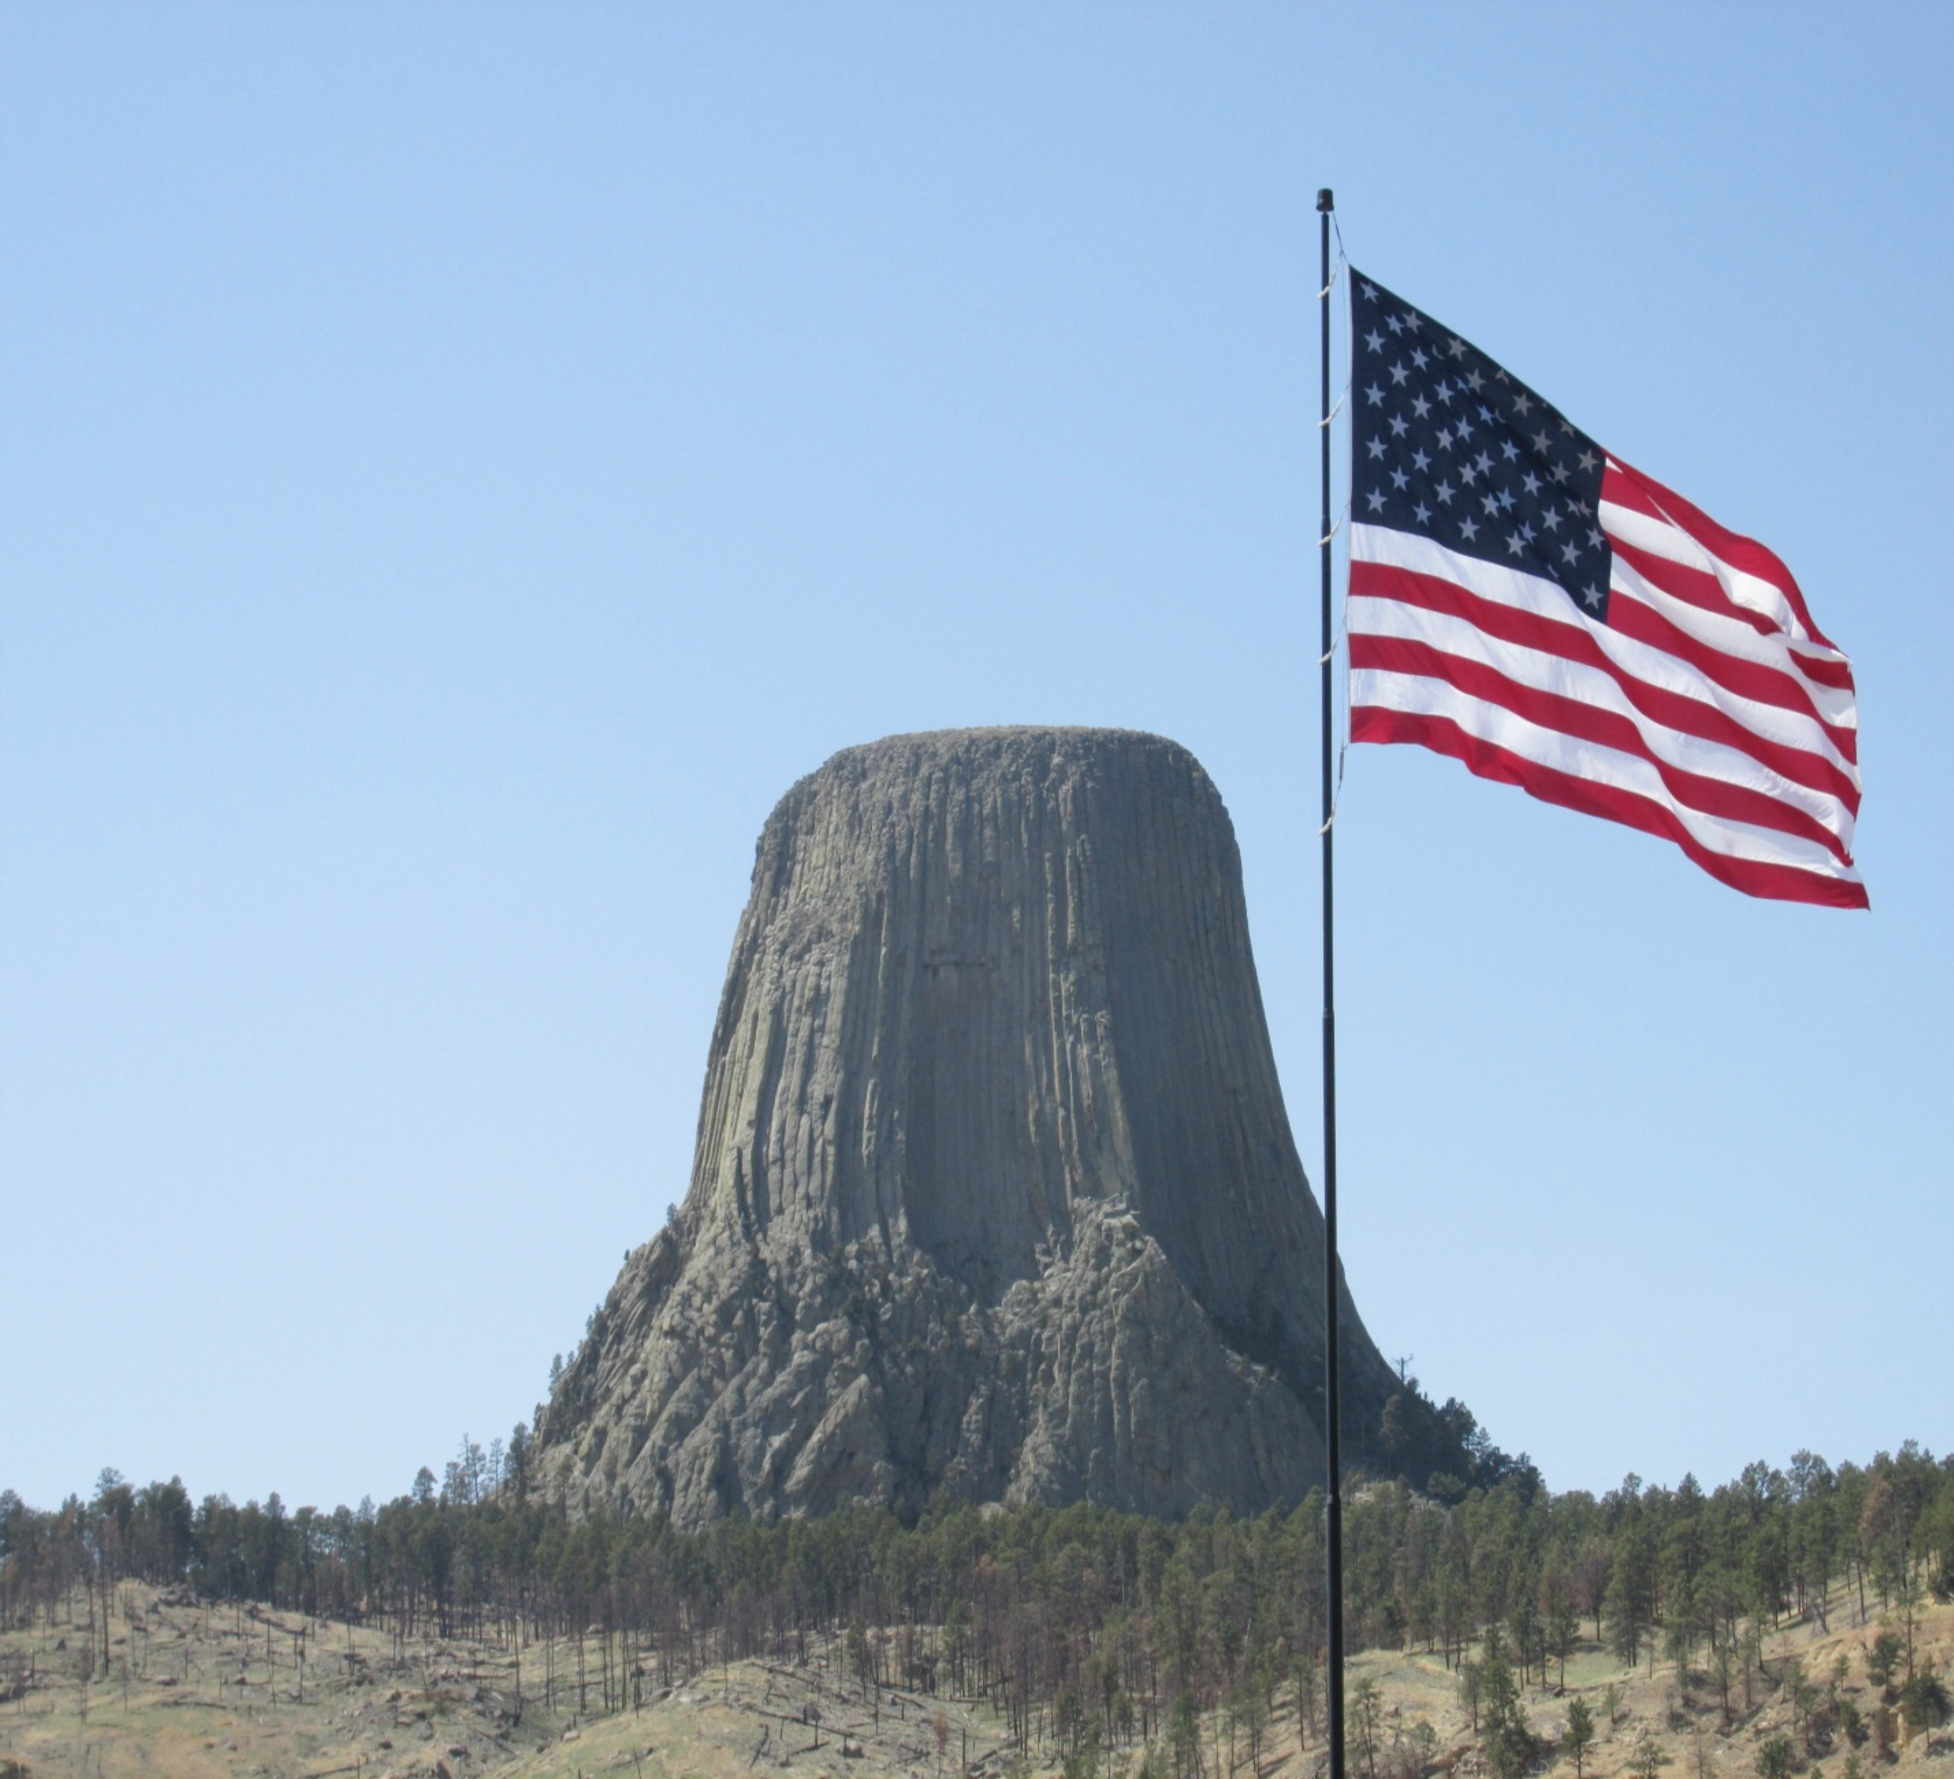 Devils Tower, photographed by Kevin Hancock